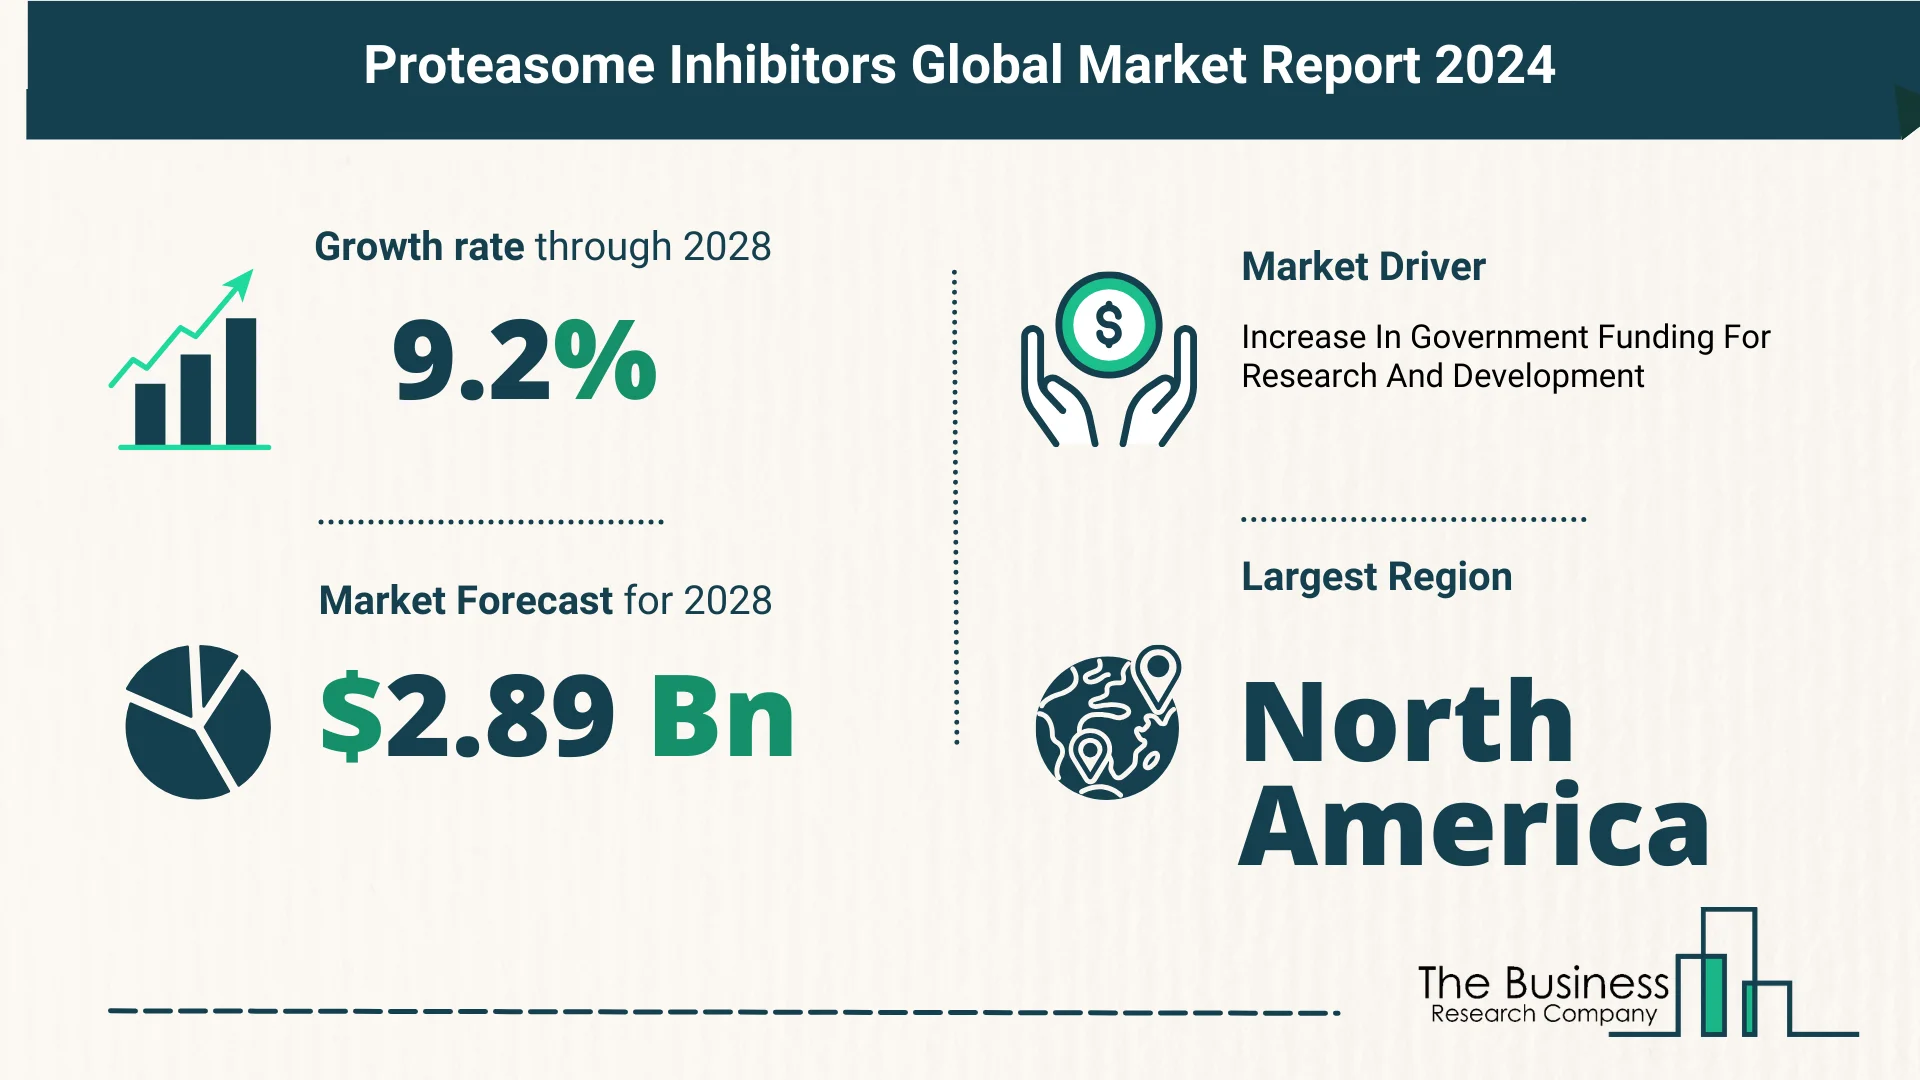 Top 5 Insights From The Proteasome Inhibitors Market Report 2024